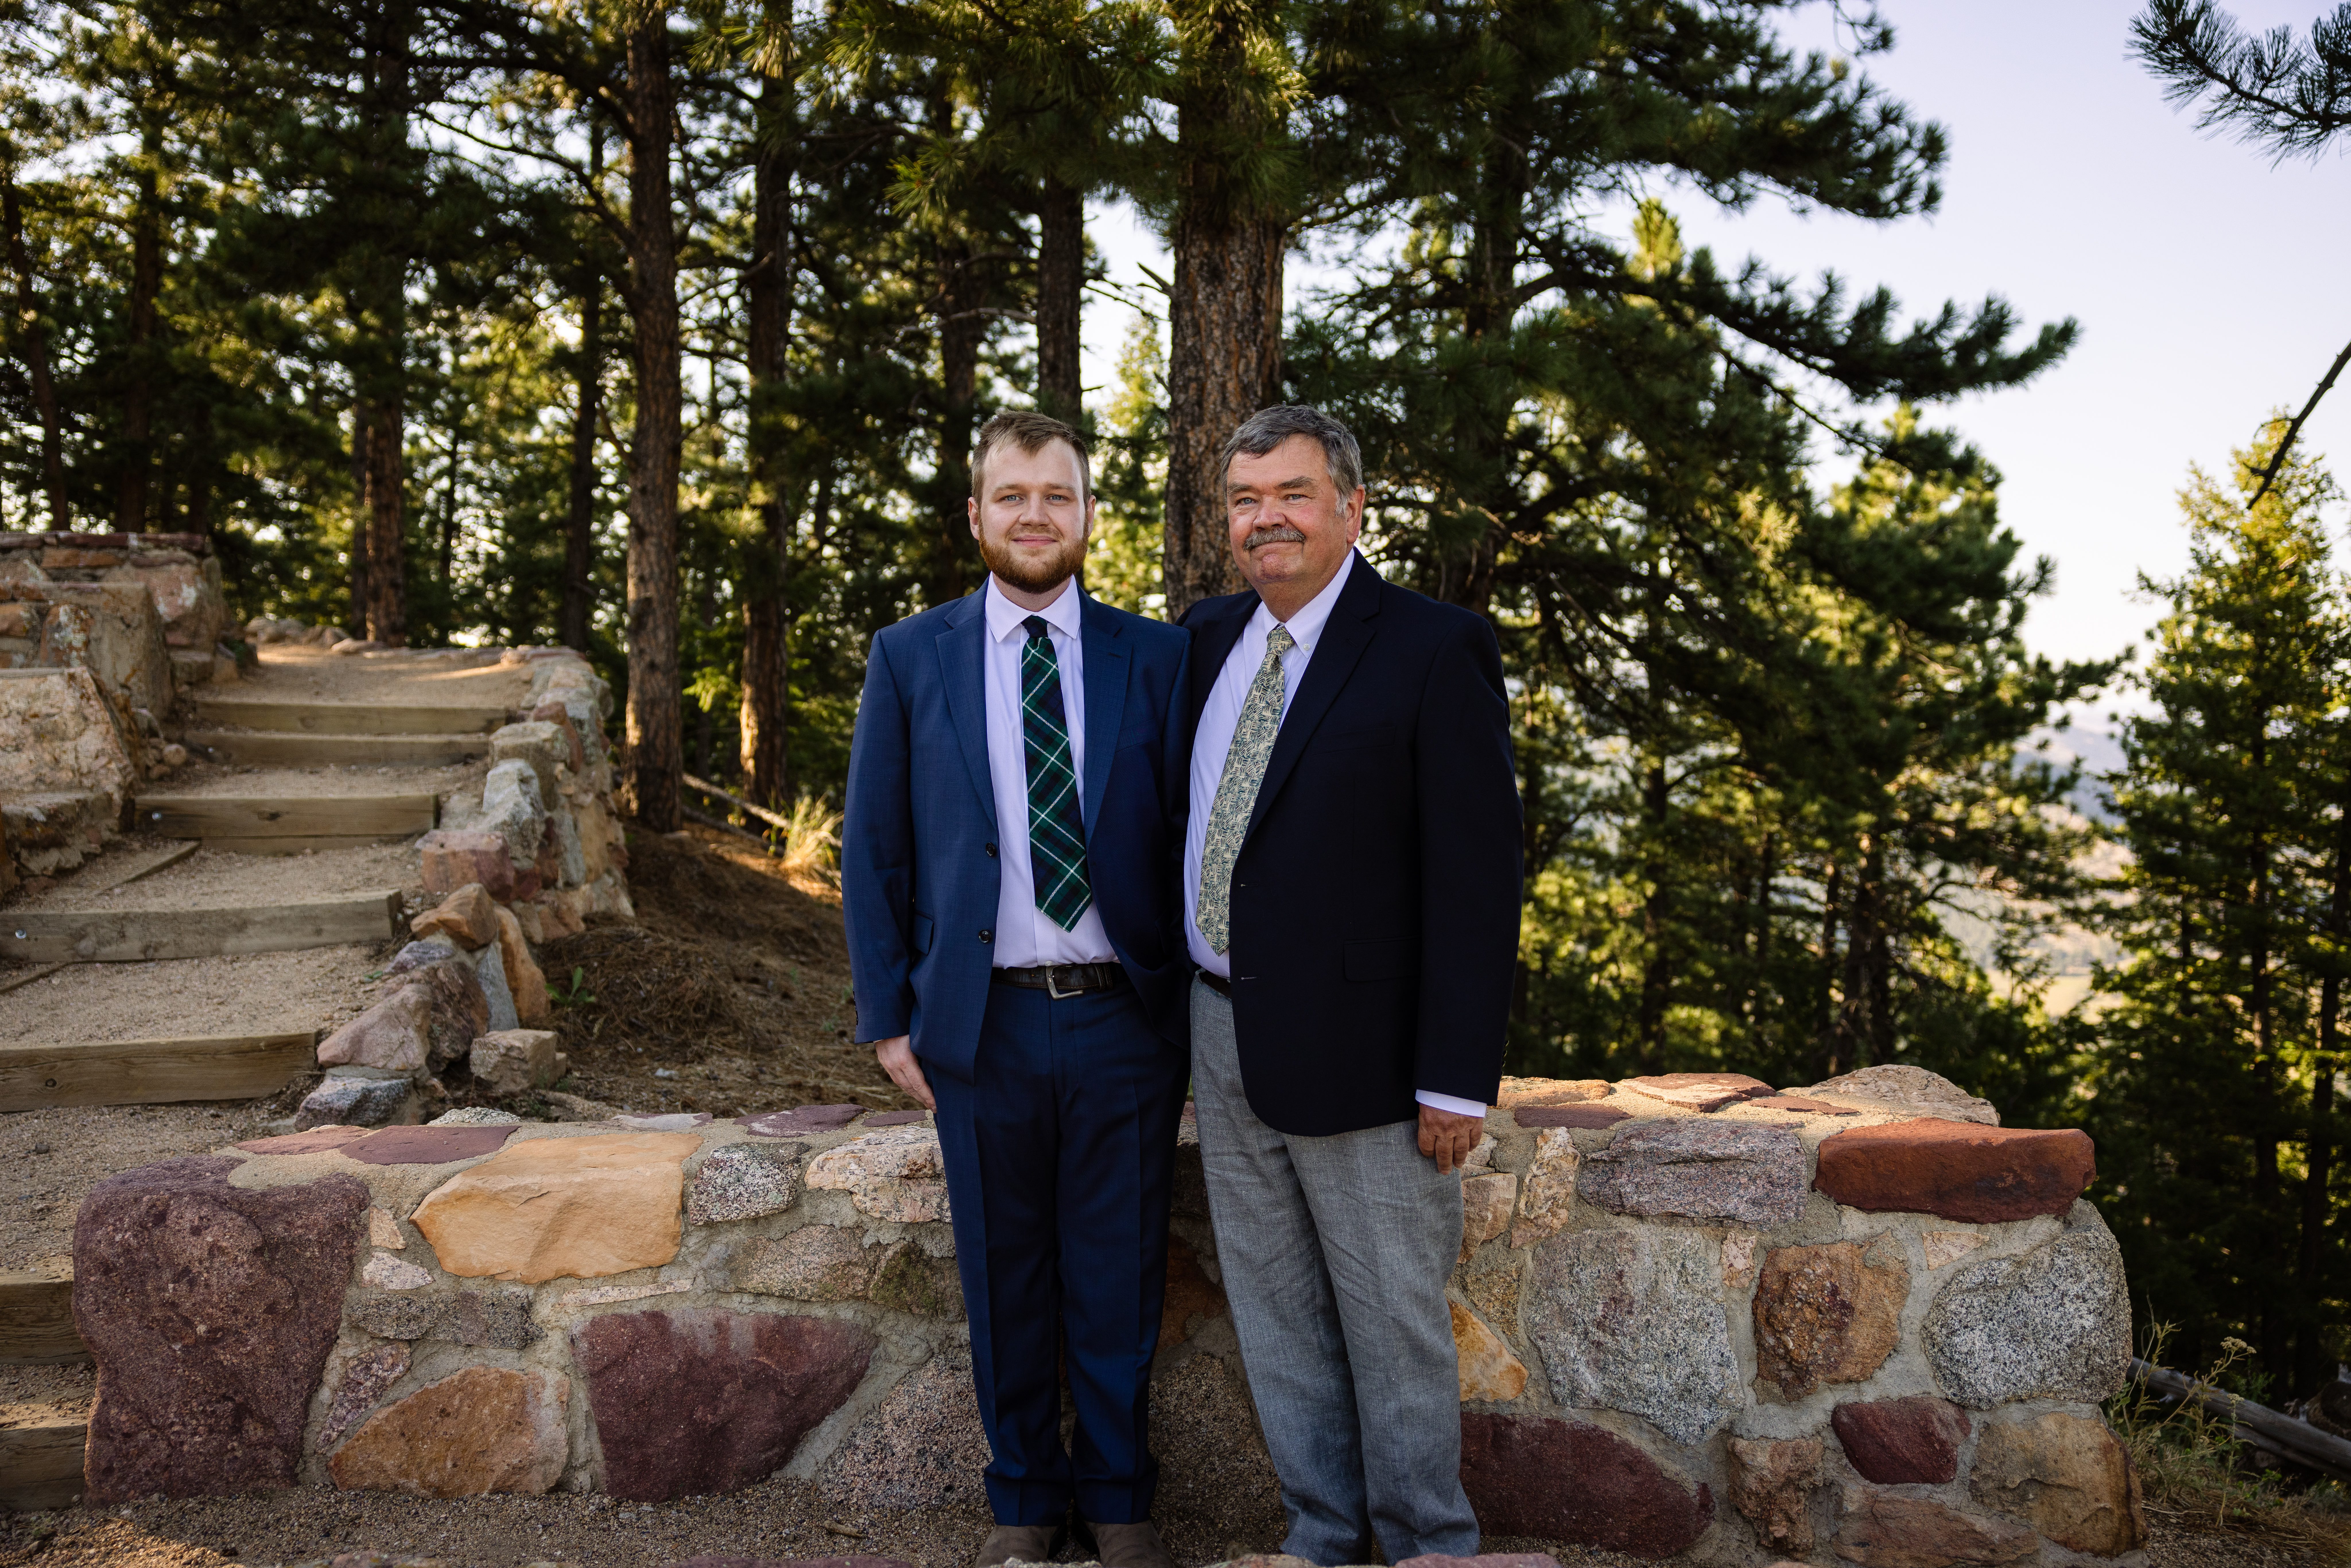 The groom and his Dad after his Sunrise Amphitheater wedding.